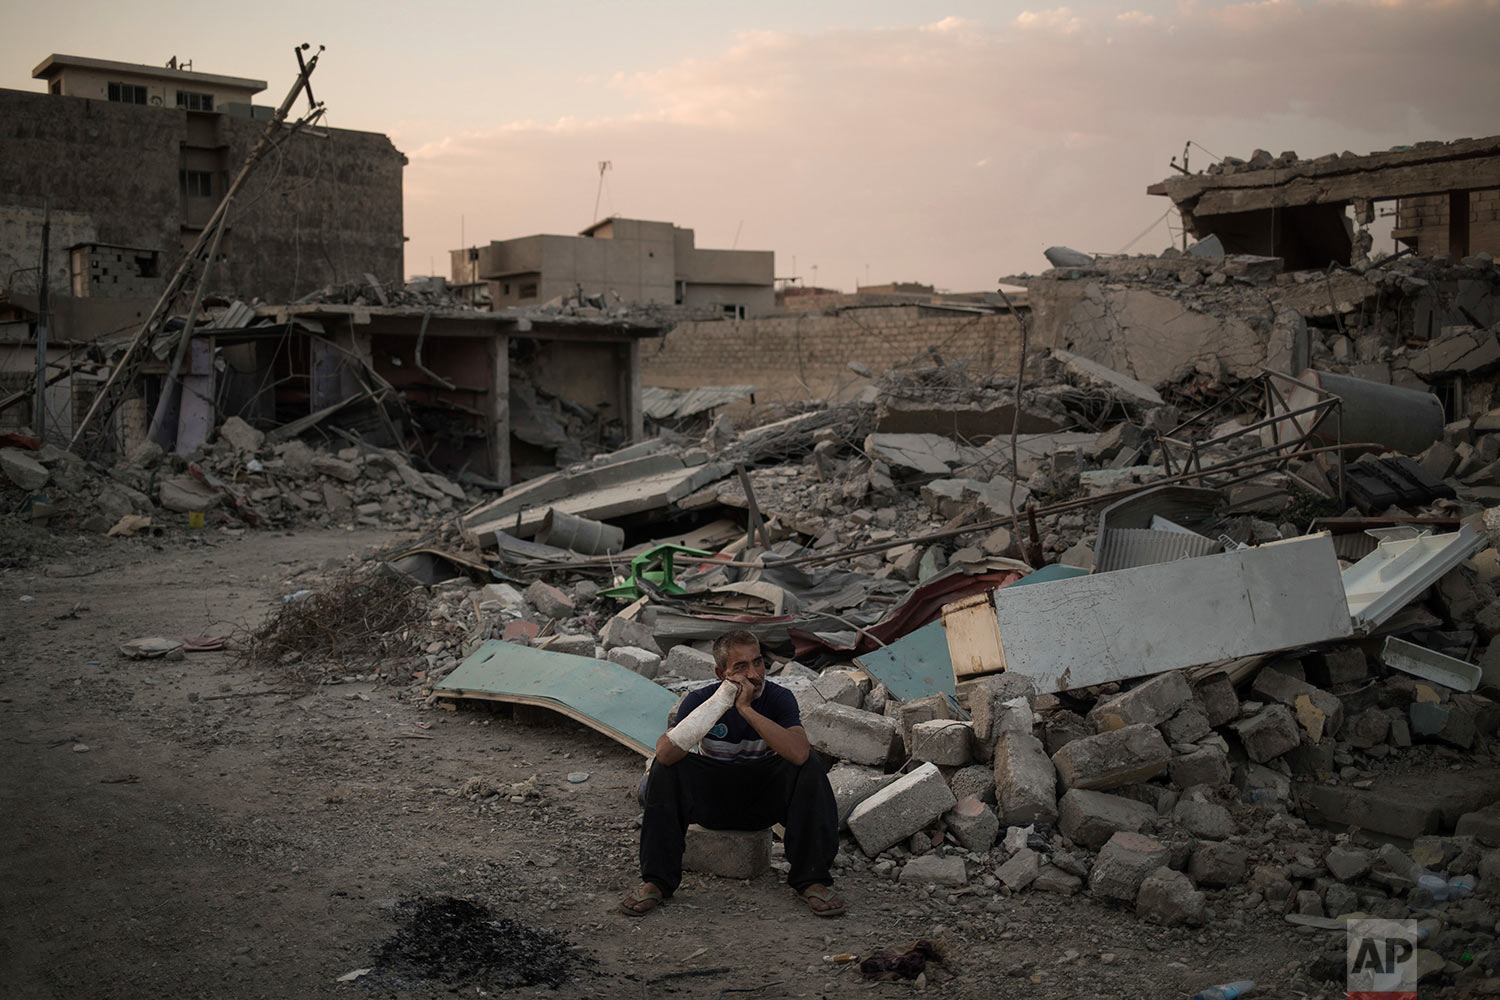 In this July 13, 2017 photo, Saddam Salih Ahmed, who was injured when his house was hit by an explosion, sits on his damaged street in the west side of Mosul, Iraq. (AP Photo/Felipe Dana)